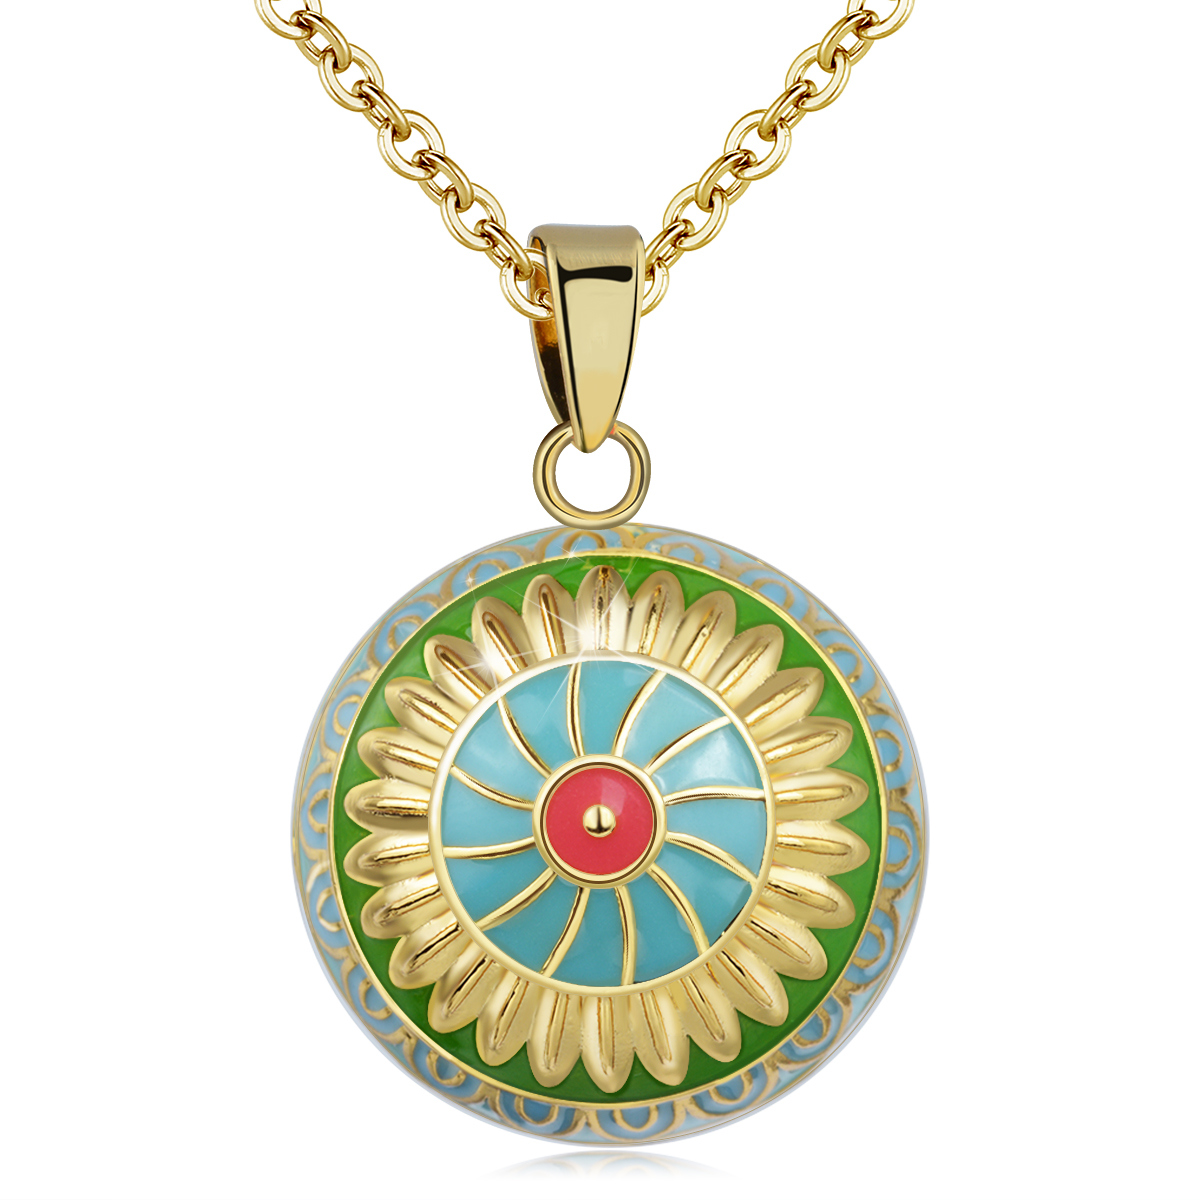 Merryshine Jewelry Angel Chime Caller Pregnancy Mexico Bola Ball Harmony Gold Chain Necklace